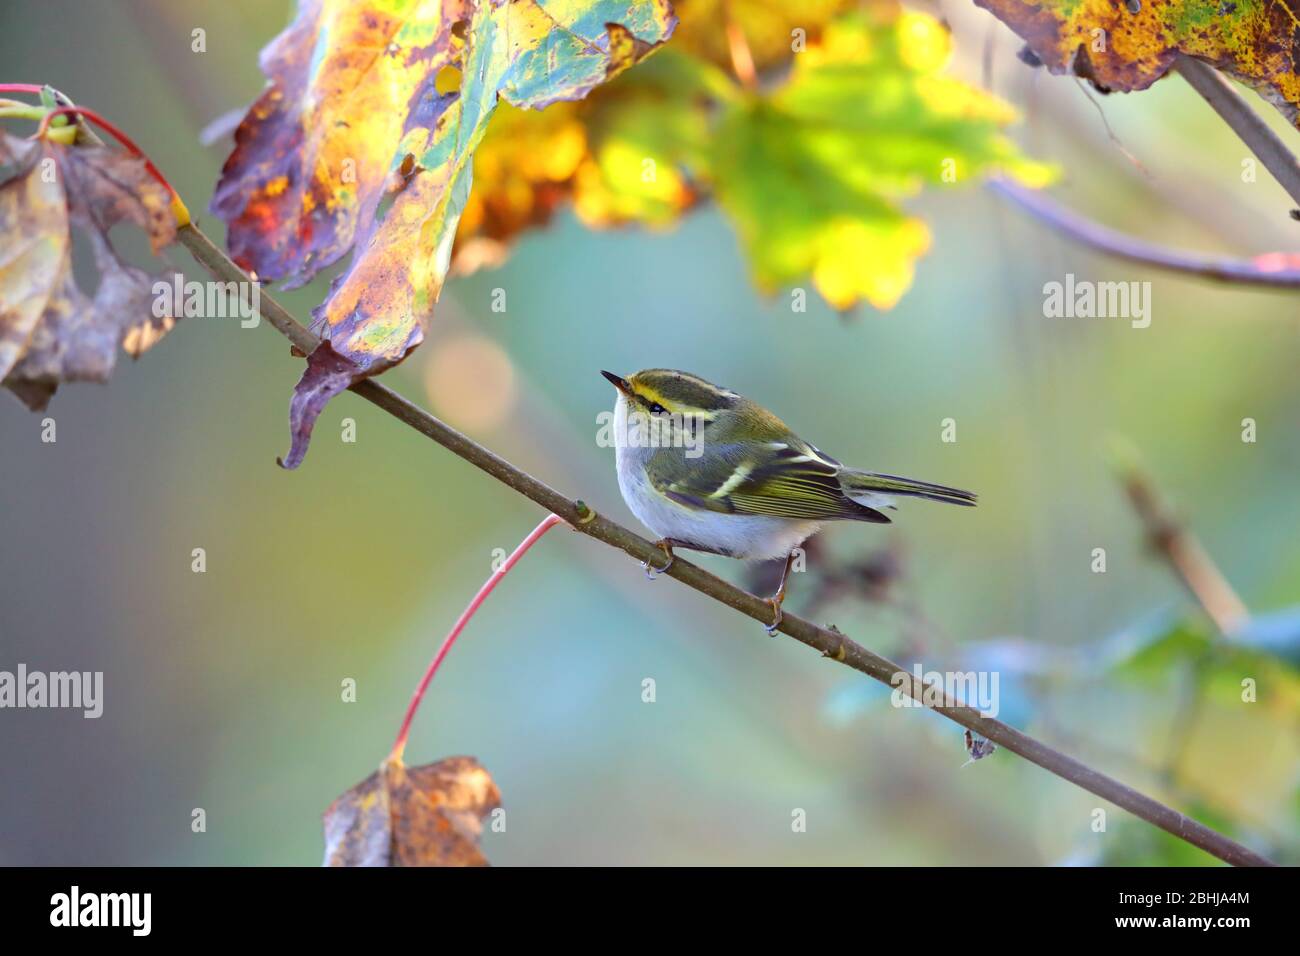 A Pallas's Leaf Warbler or Pallas's Warbler (Phylloscopus proregulus) on the coast of Essex in November Stock Photo